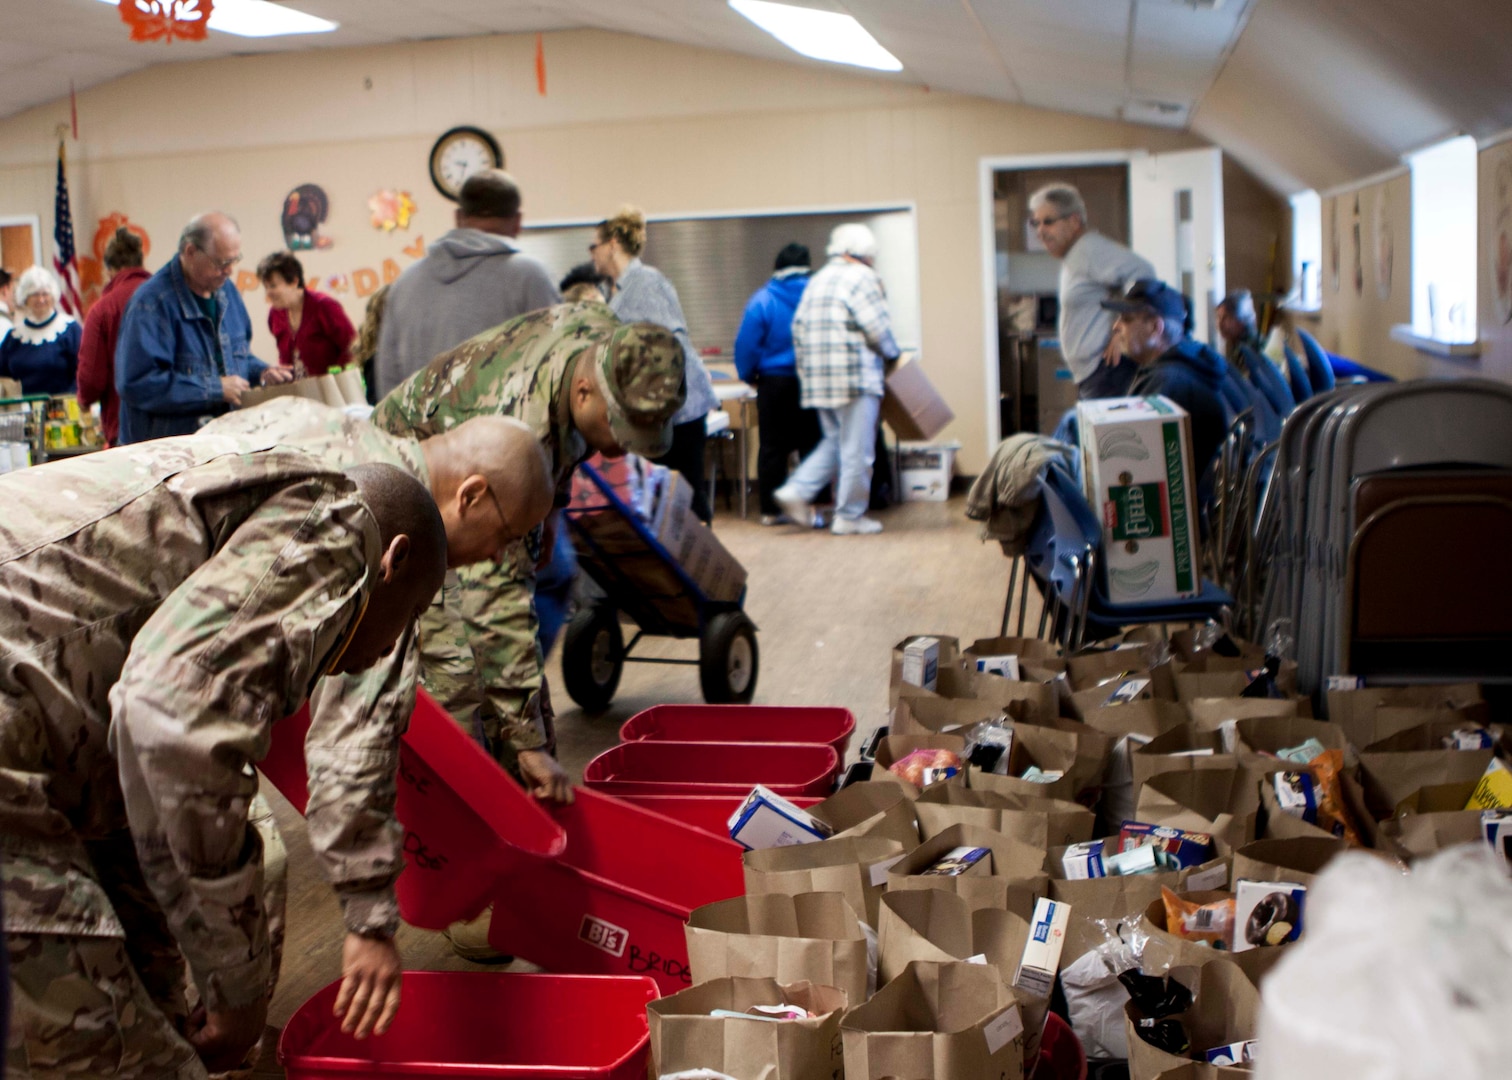 Military members stationed at Defense Distribution Center, Susquehanna, work to load meals to be delivered to shut-ins at the West Shore Senior Center on Nov. 20. 

